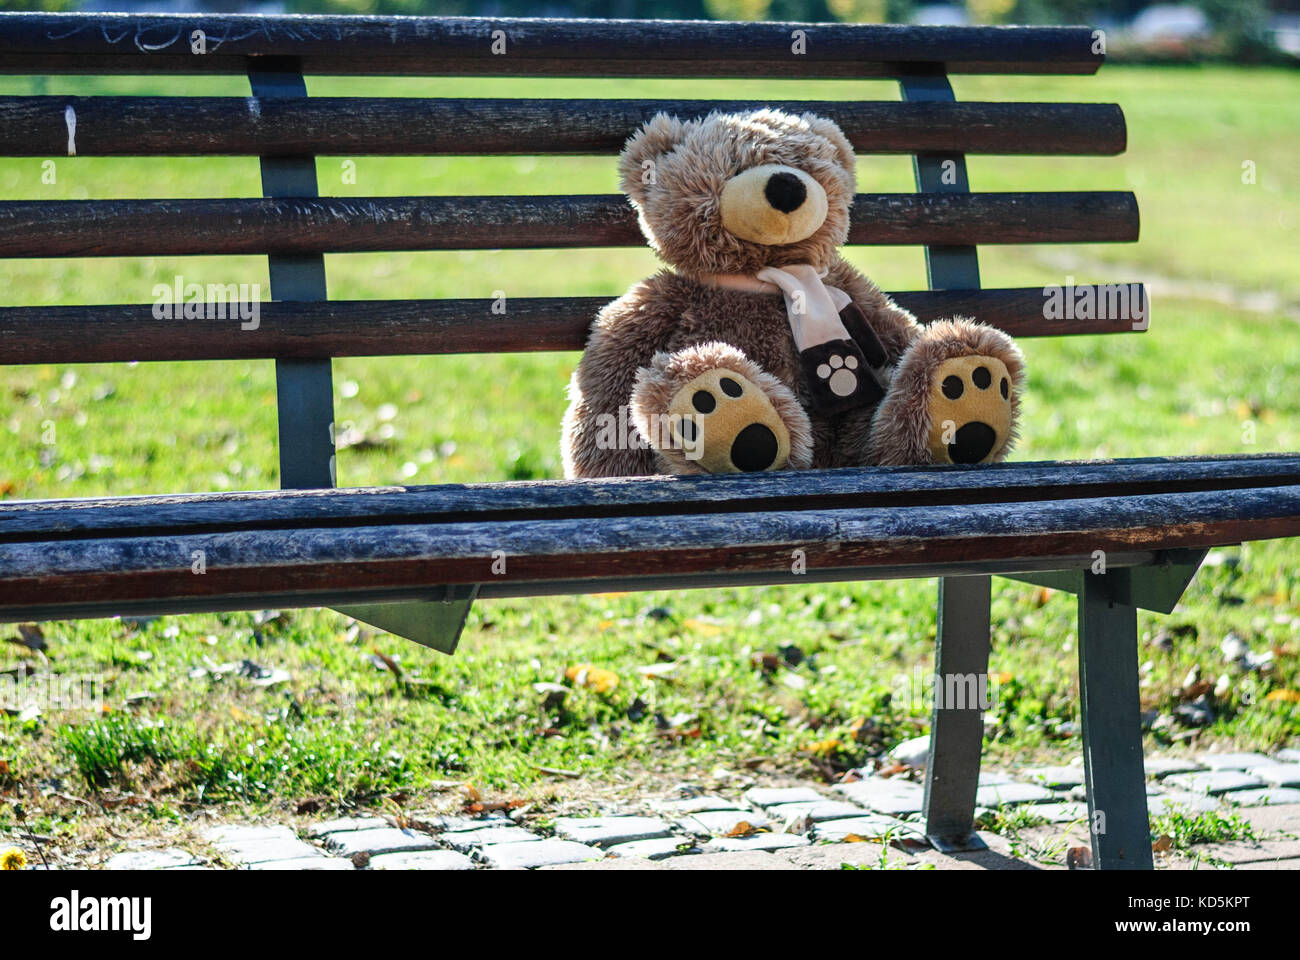 Abandoned teddy bear left outdoors, to find a new owner Stock Photo